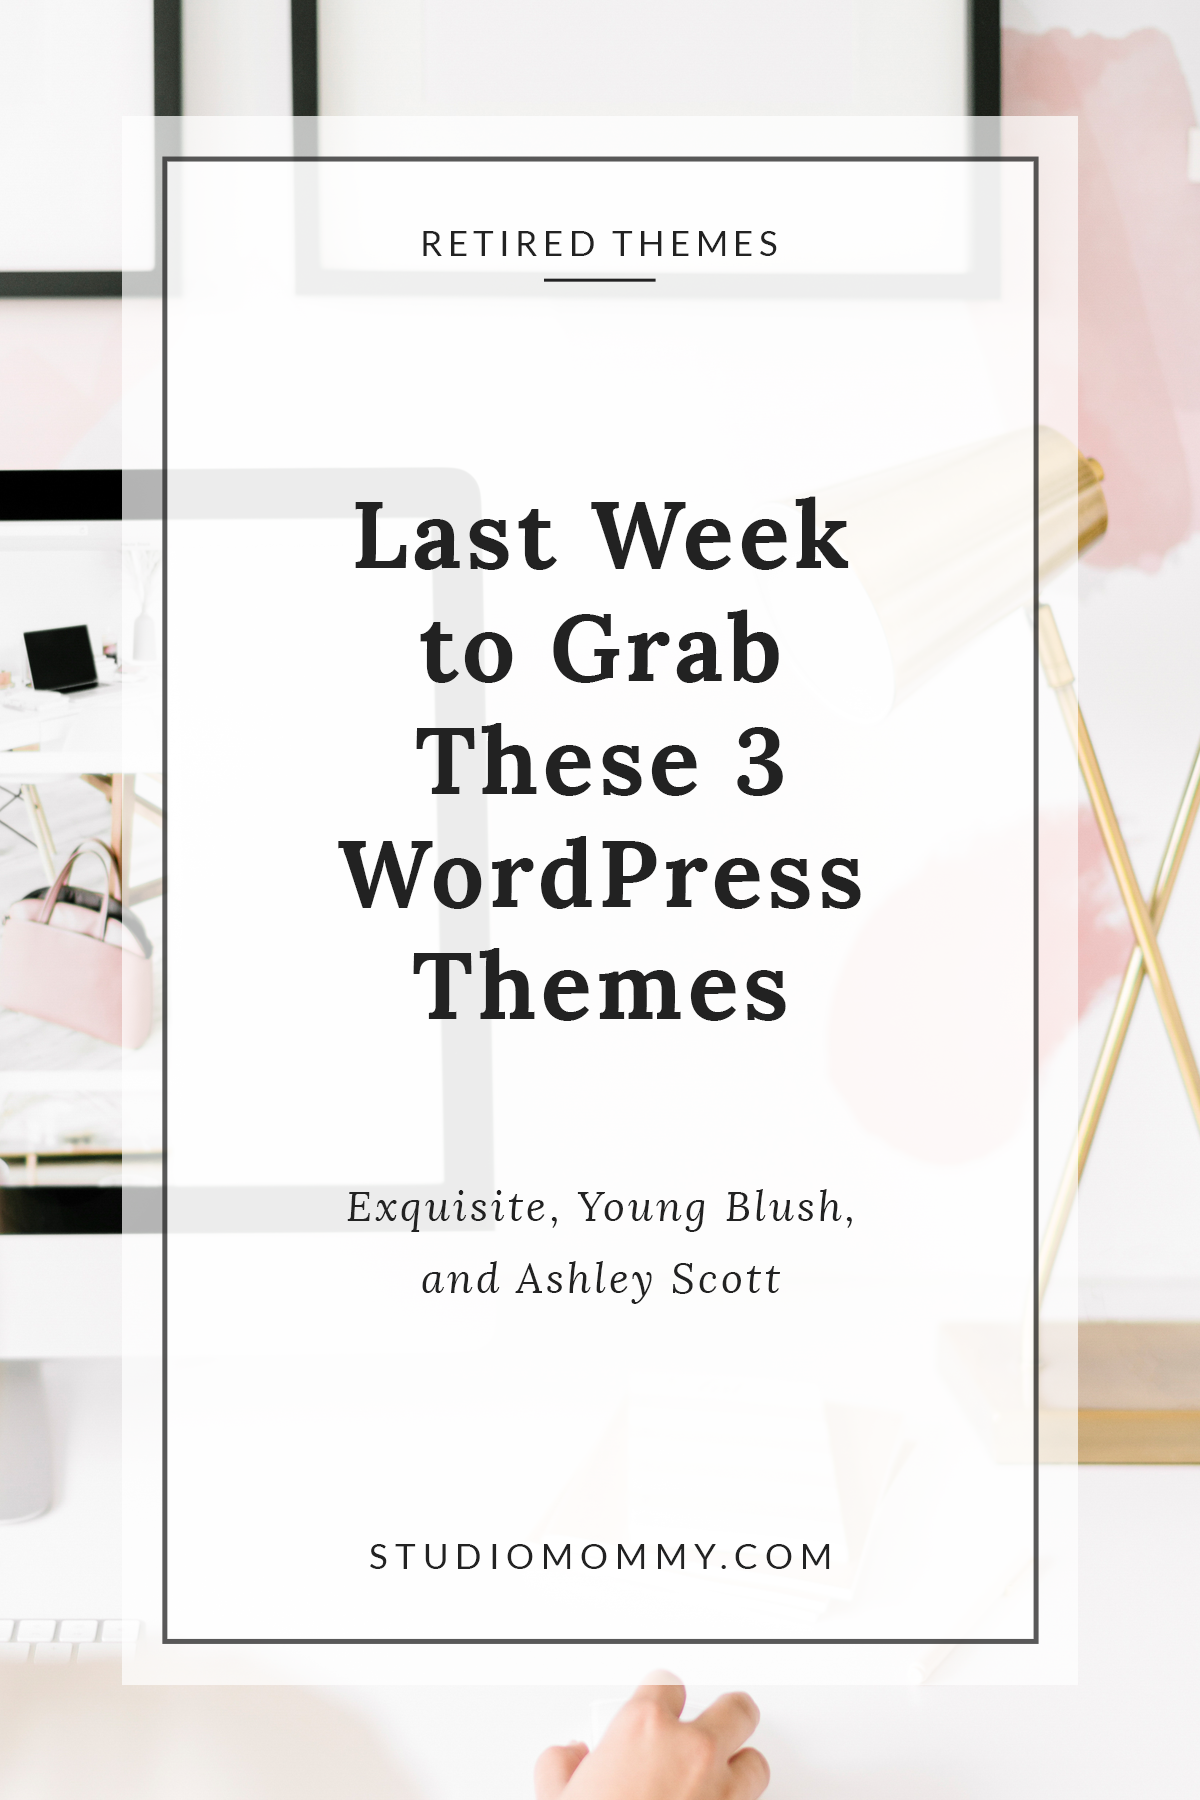 We will be retiring 3 of Studio Mommy’s WordPress themes. This will be the last week to get the Exquisite, Young Blush, and Ashley Scott themes. They will be available until Friday, April 24th 2020 midnight CST.